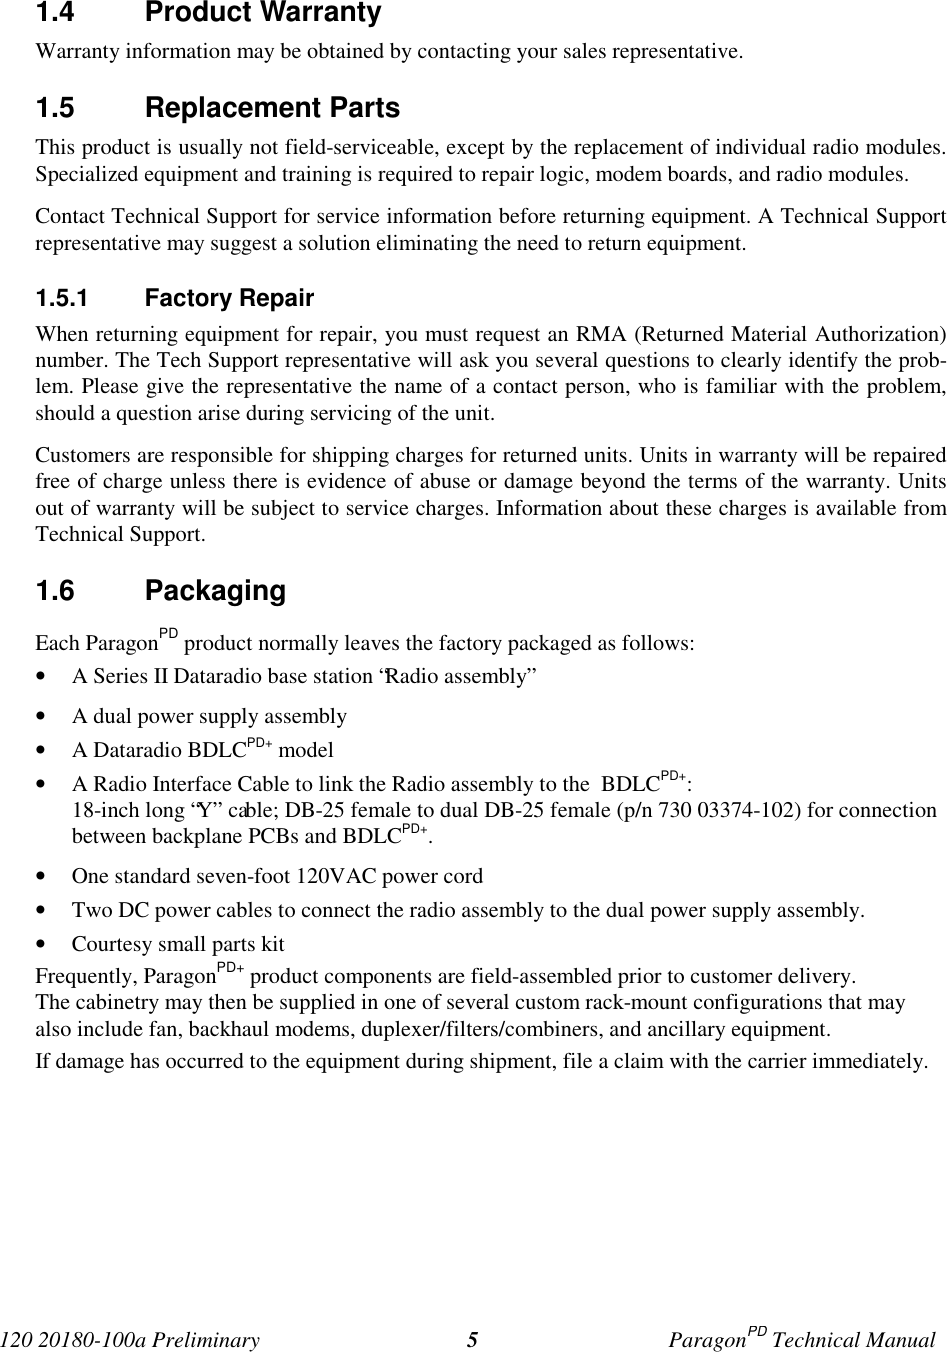 Page 9 of CalAmp Wireless Networks BDD4T85-1 Paragon/PD User Manual Parg PD  T100a Prelim